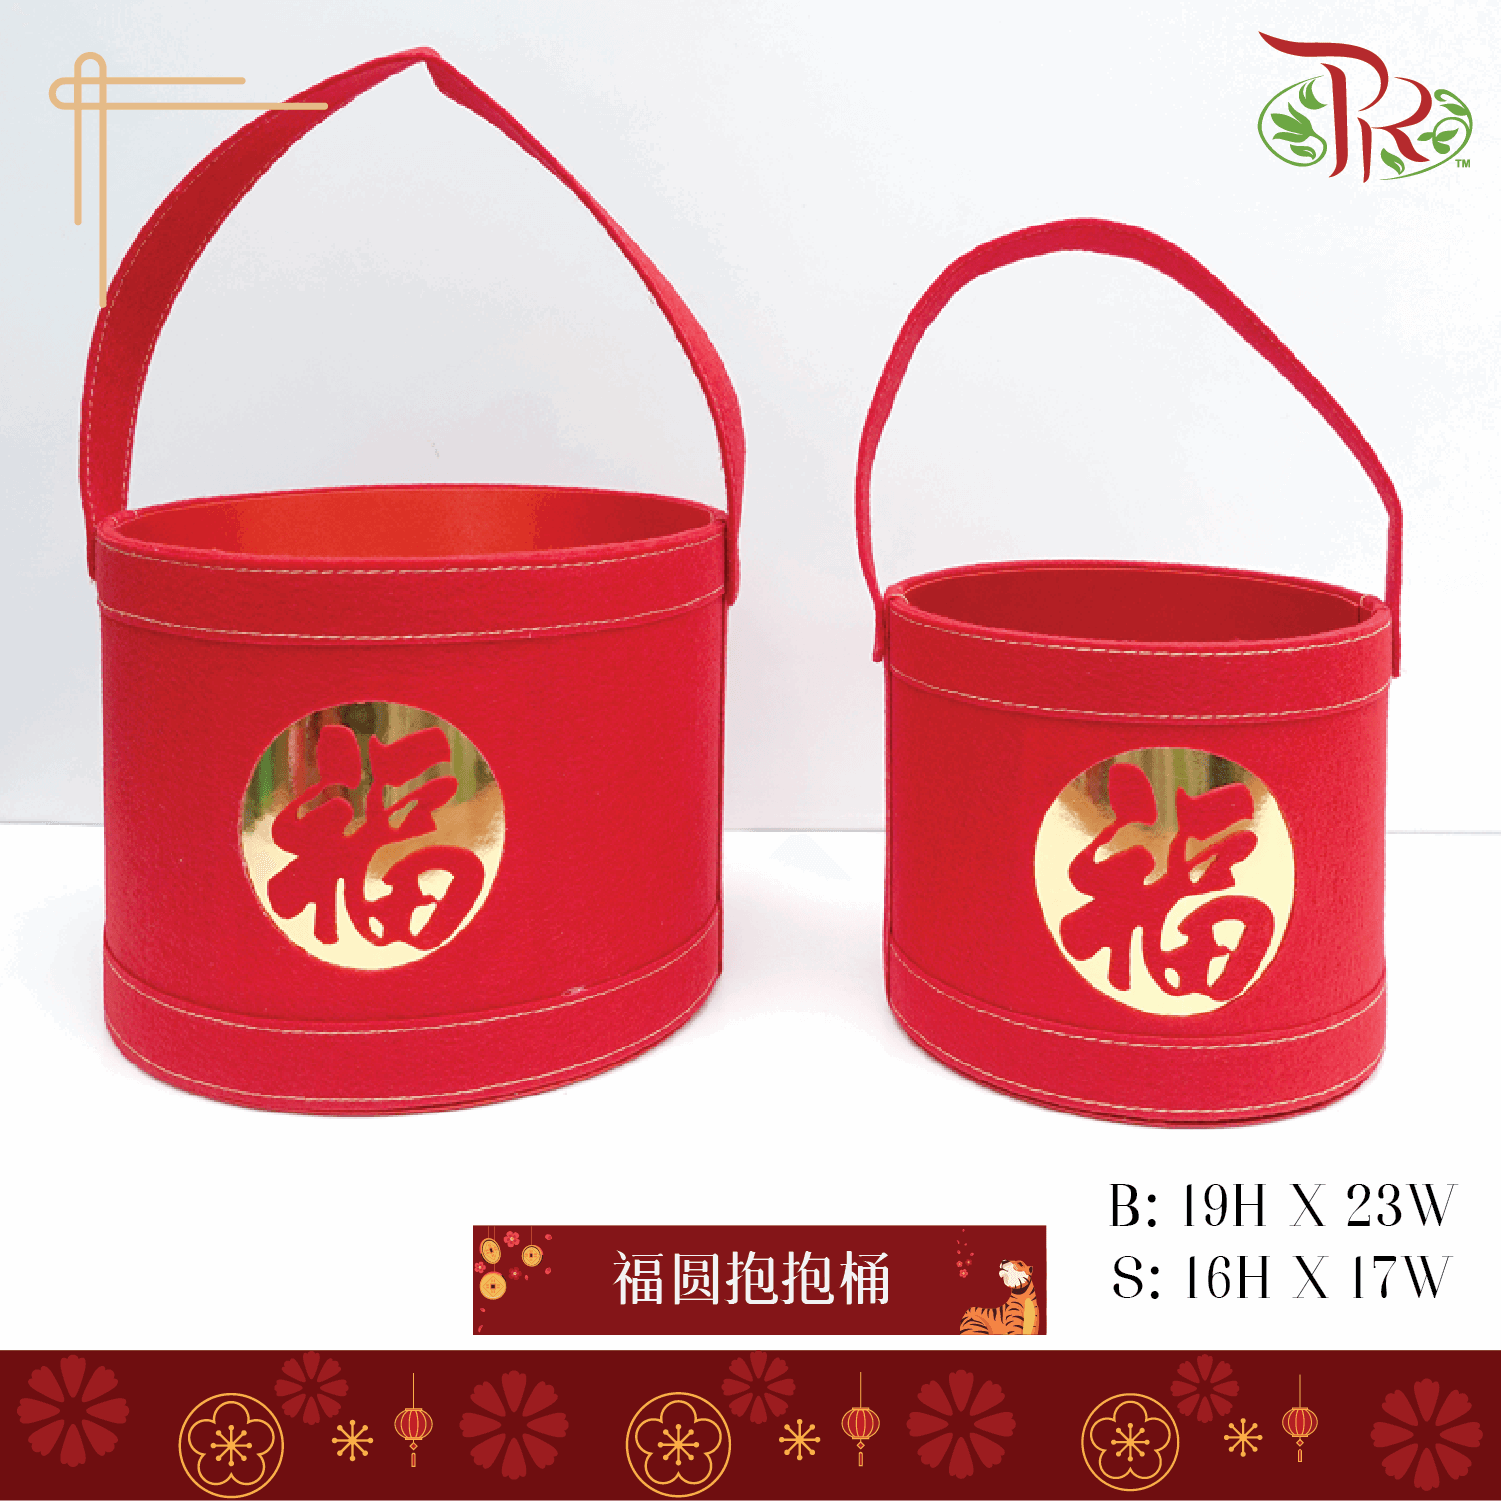 CNY Flower Box - Red (2 in 1) - Pudu Ria Florist